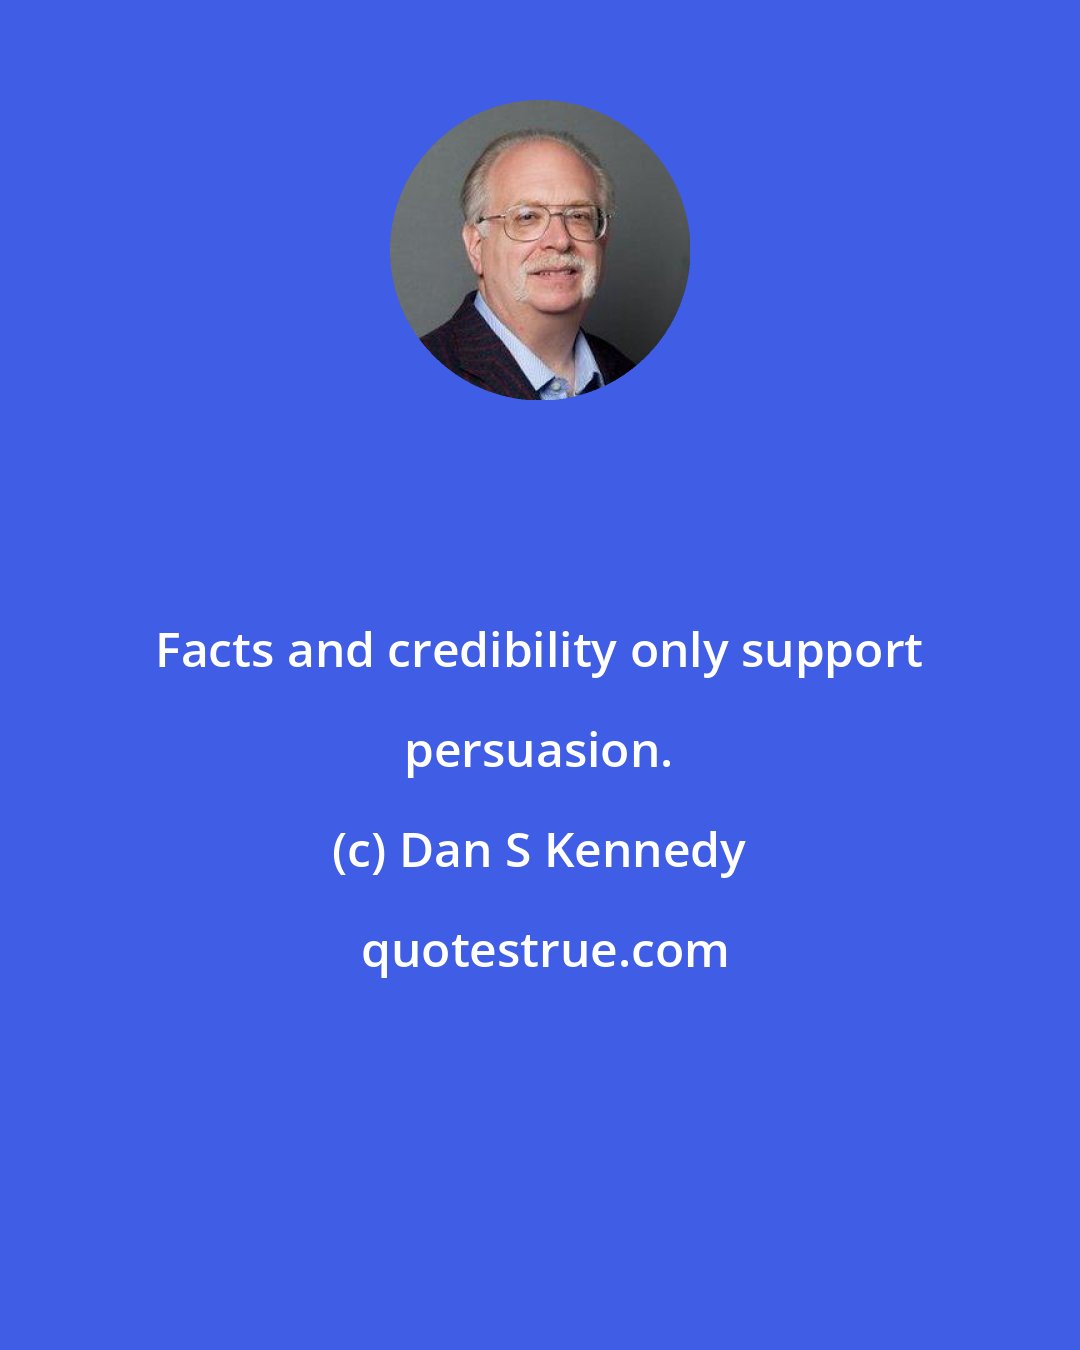 Dan S Kennedy: Facts and credibility only support persuasion.